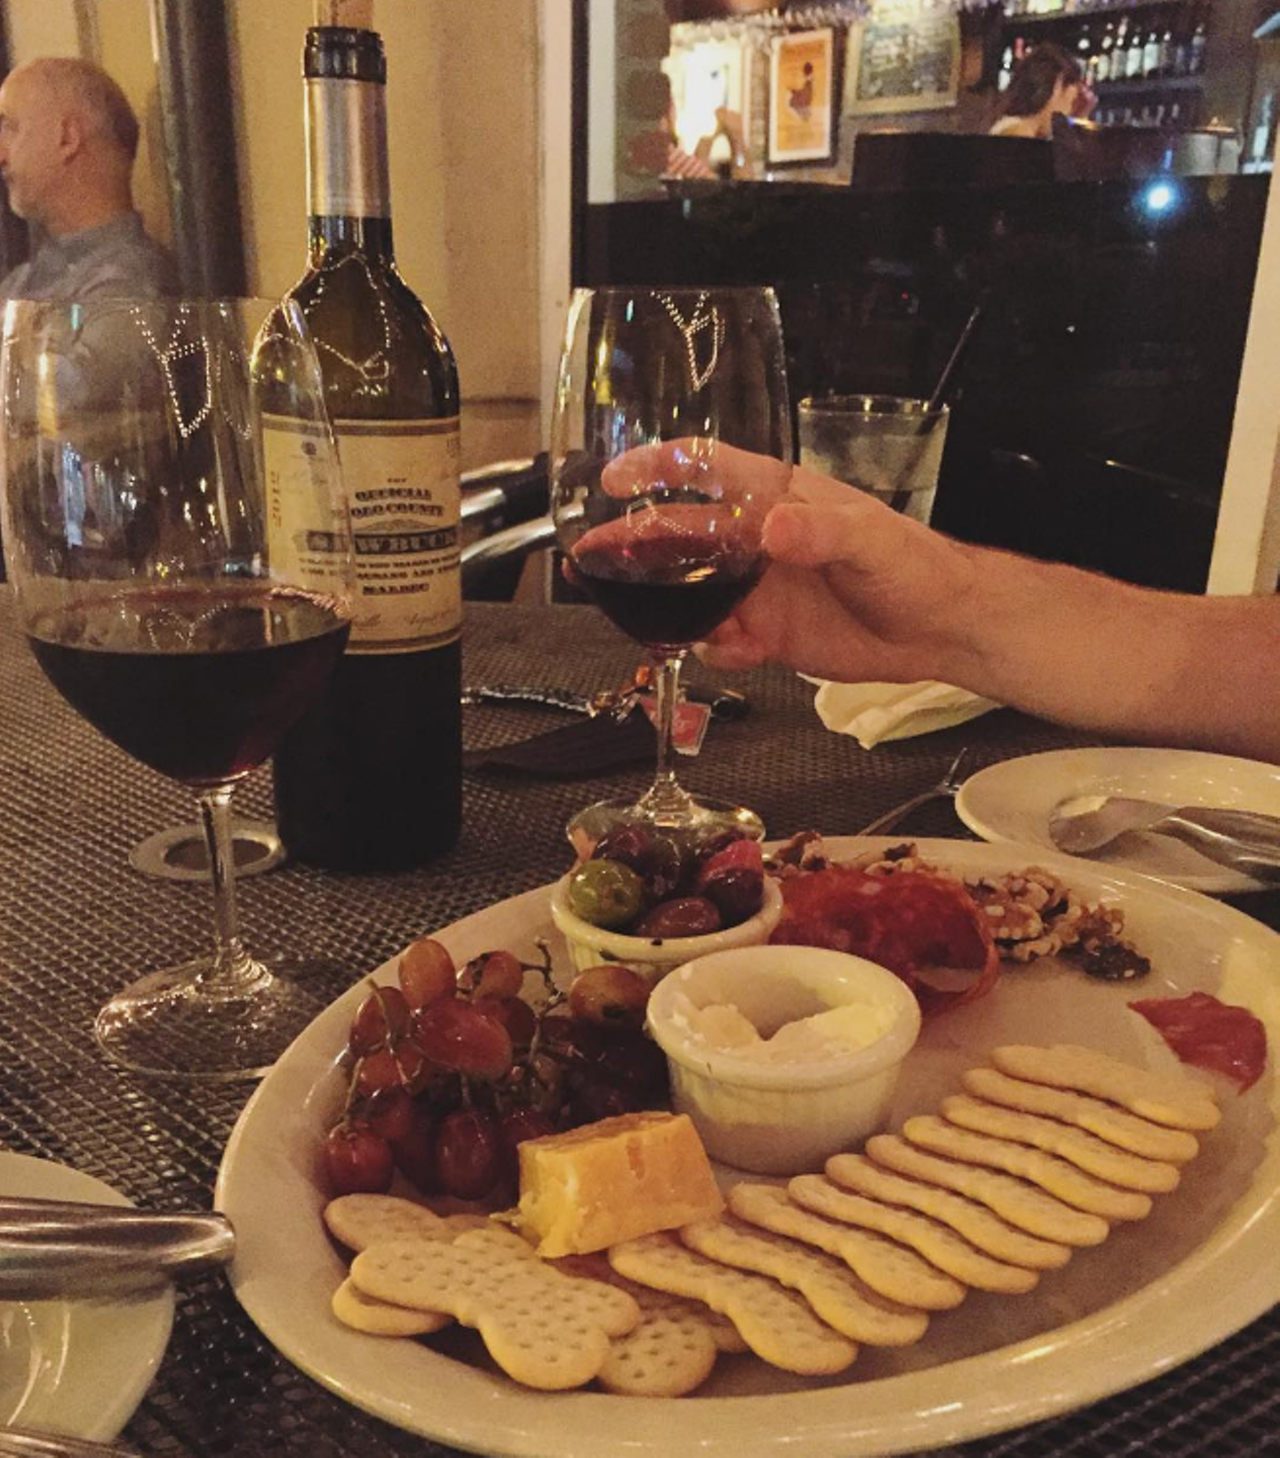 Eola Wine Company
430 E. Central Blvd., 407-481-9100
Since 2001, this has been a hotspot for happy hours, first dates and girls nights. By the bottle, the flight or the glass, the views of our city&#146;s center can&#146;t be beat. Food is good, too.
Photo via cassiecrumbles/Instagram